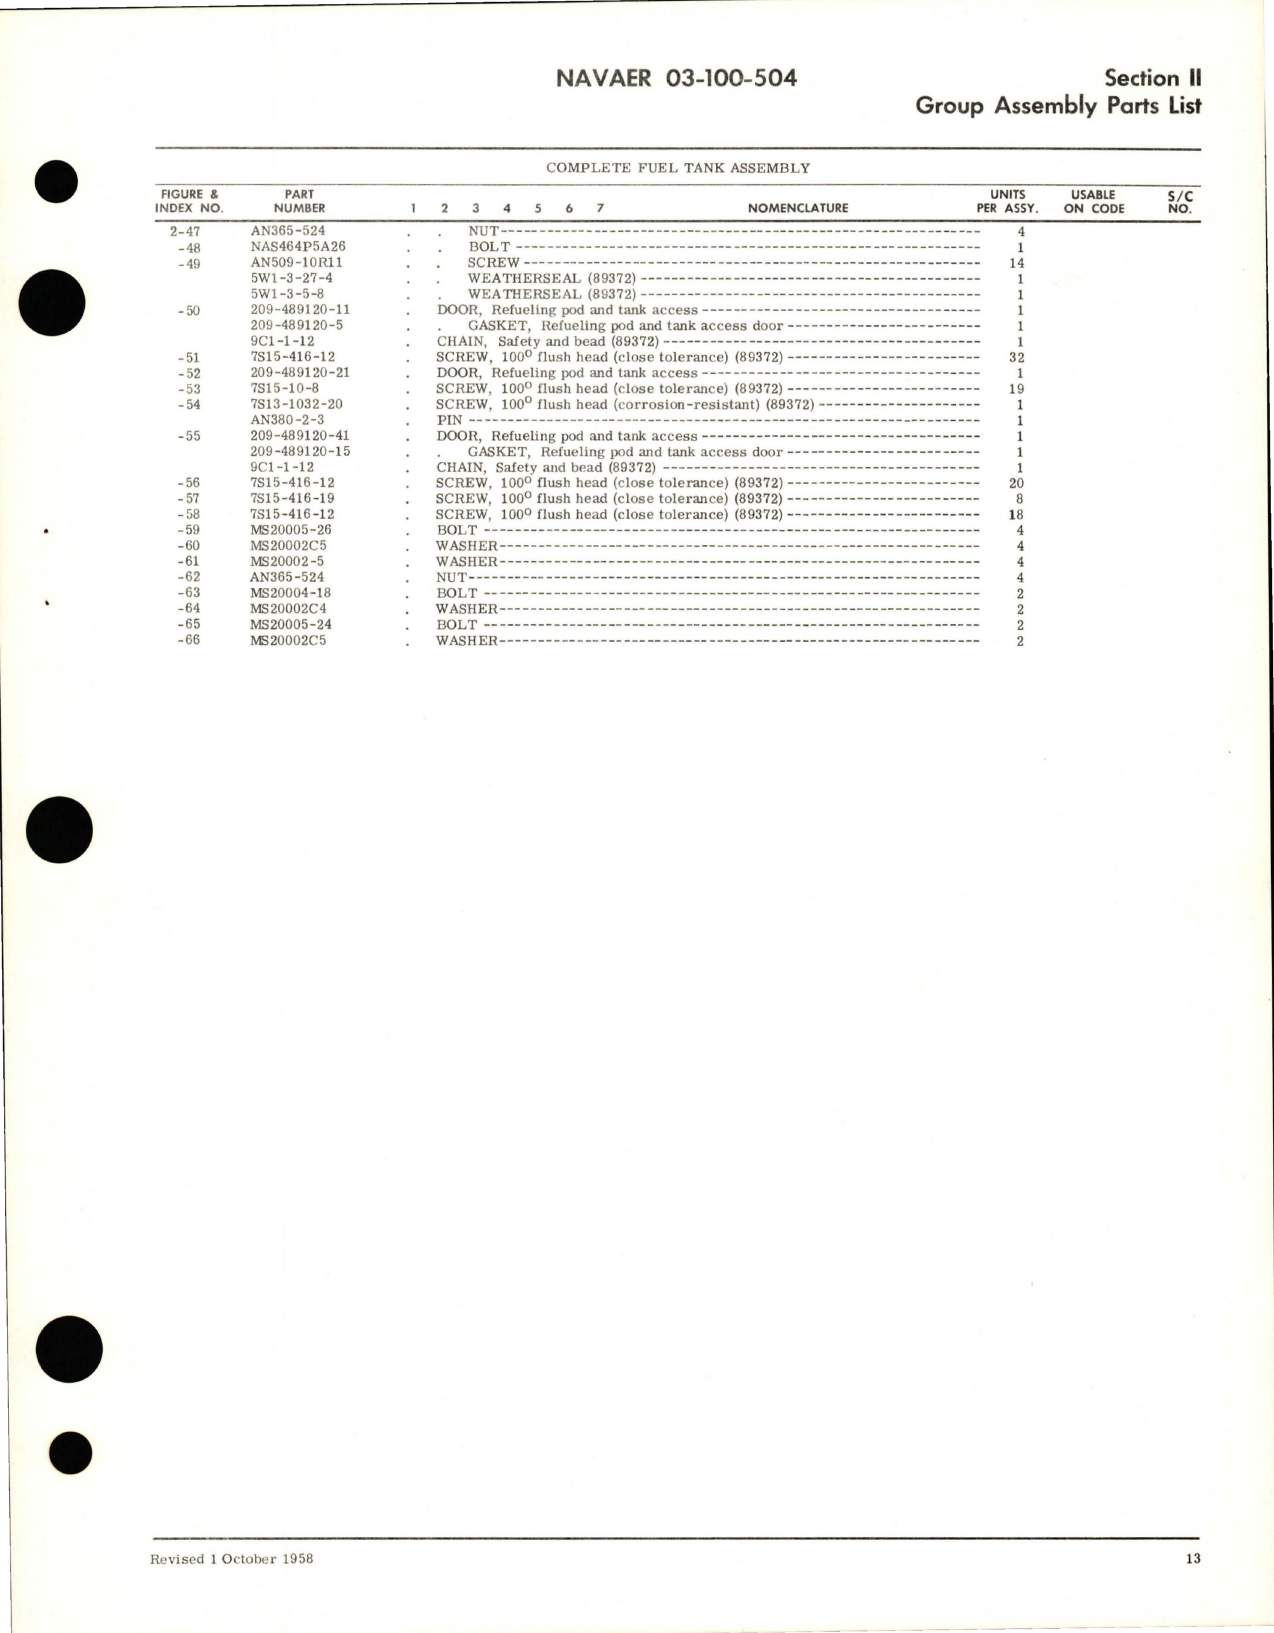 Sample page 7 from AirCorps Library document: Illustrated Parts Breakdown for In-Flight Refueling Tanker Package (Buddy Tanker) - Part 209-48901